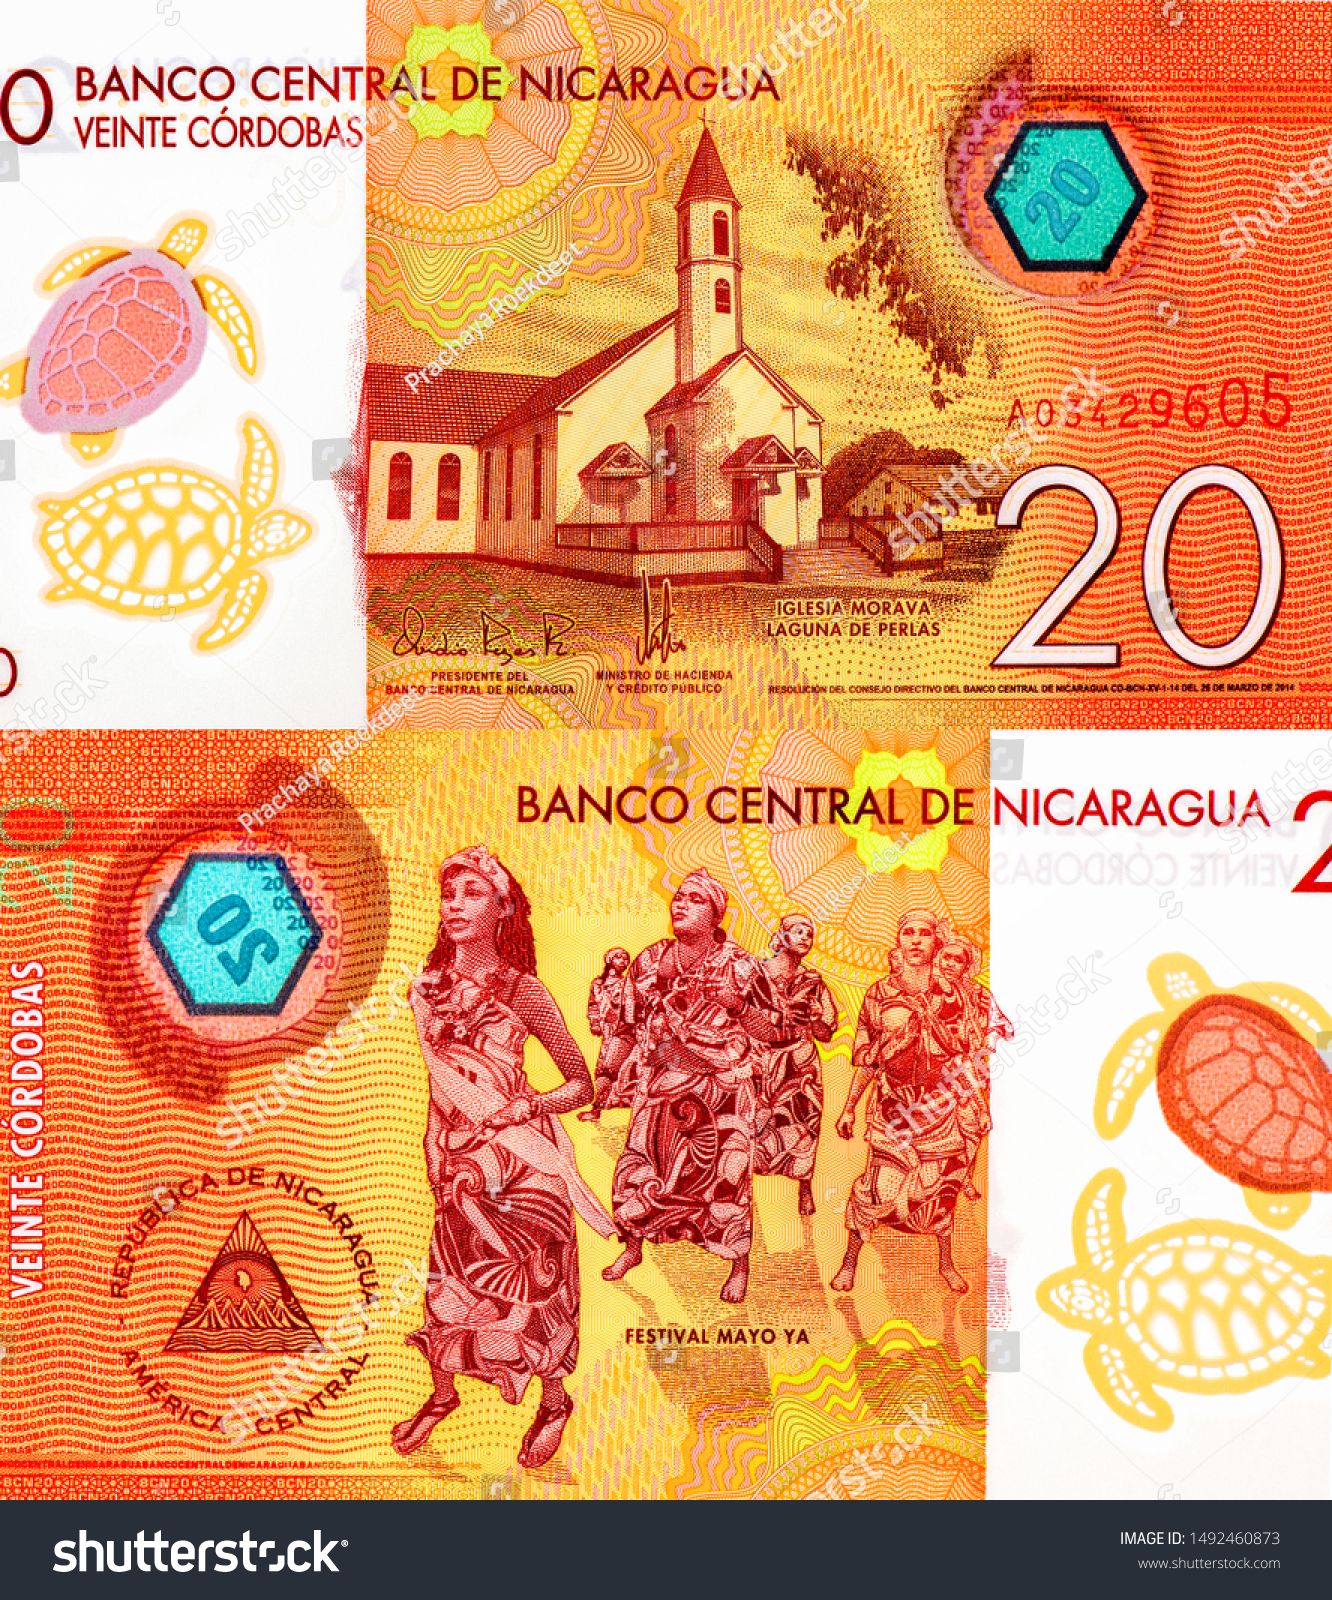 Moravian church at Pearl Lagoon. Turtles as see-through feature. Portrait from Nicaragua 20 Cordobas 2014 Polymer Banknotes. An Old Polymer banknote, vintage retro. Famous ancient Banknotes.  #1492460873